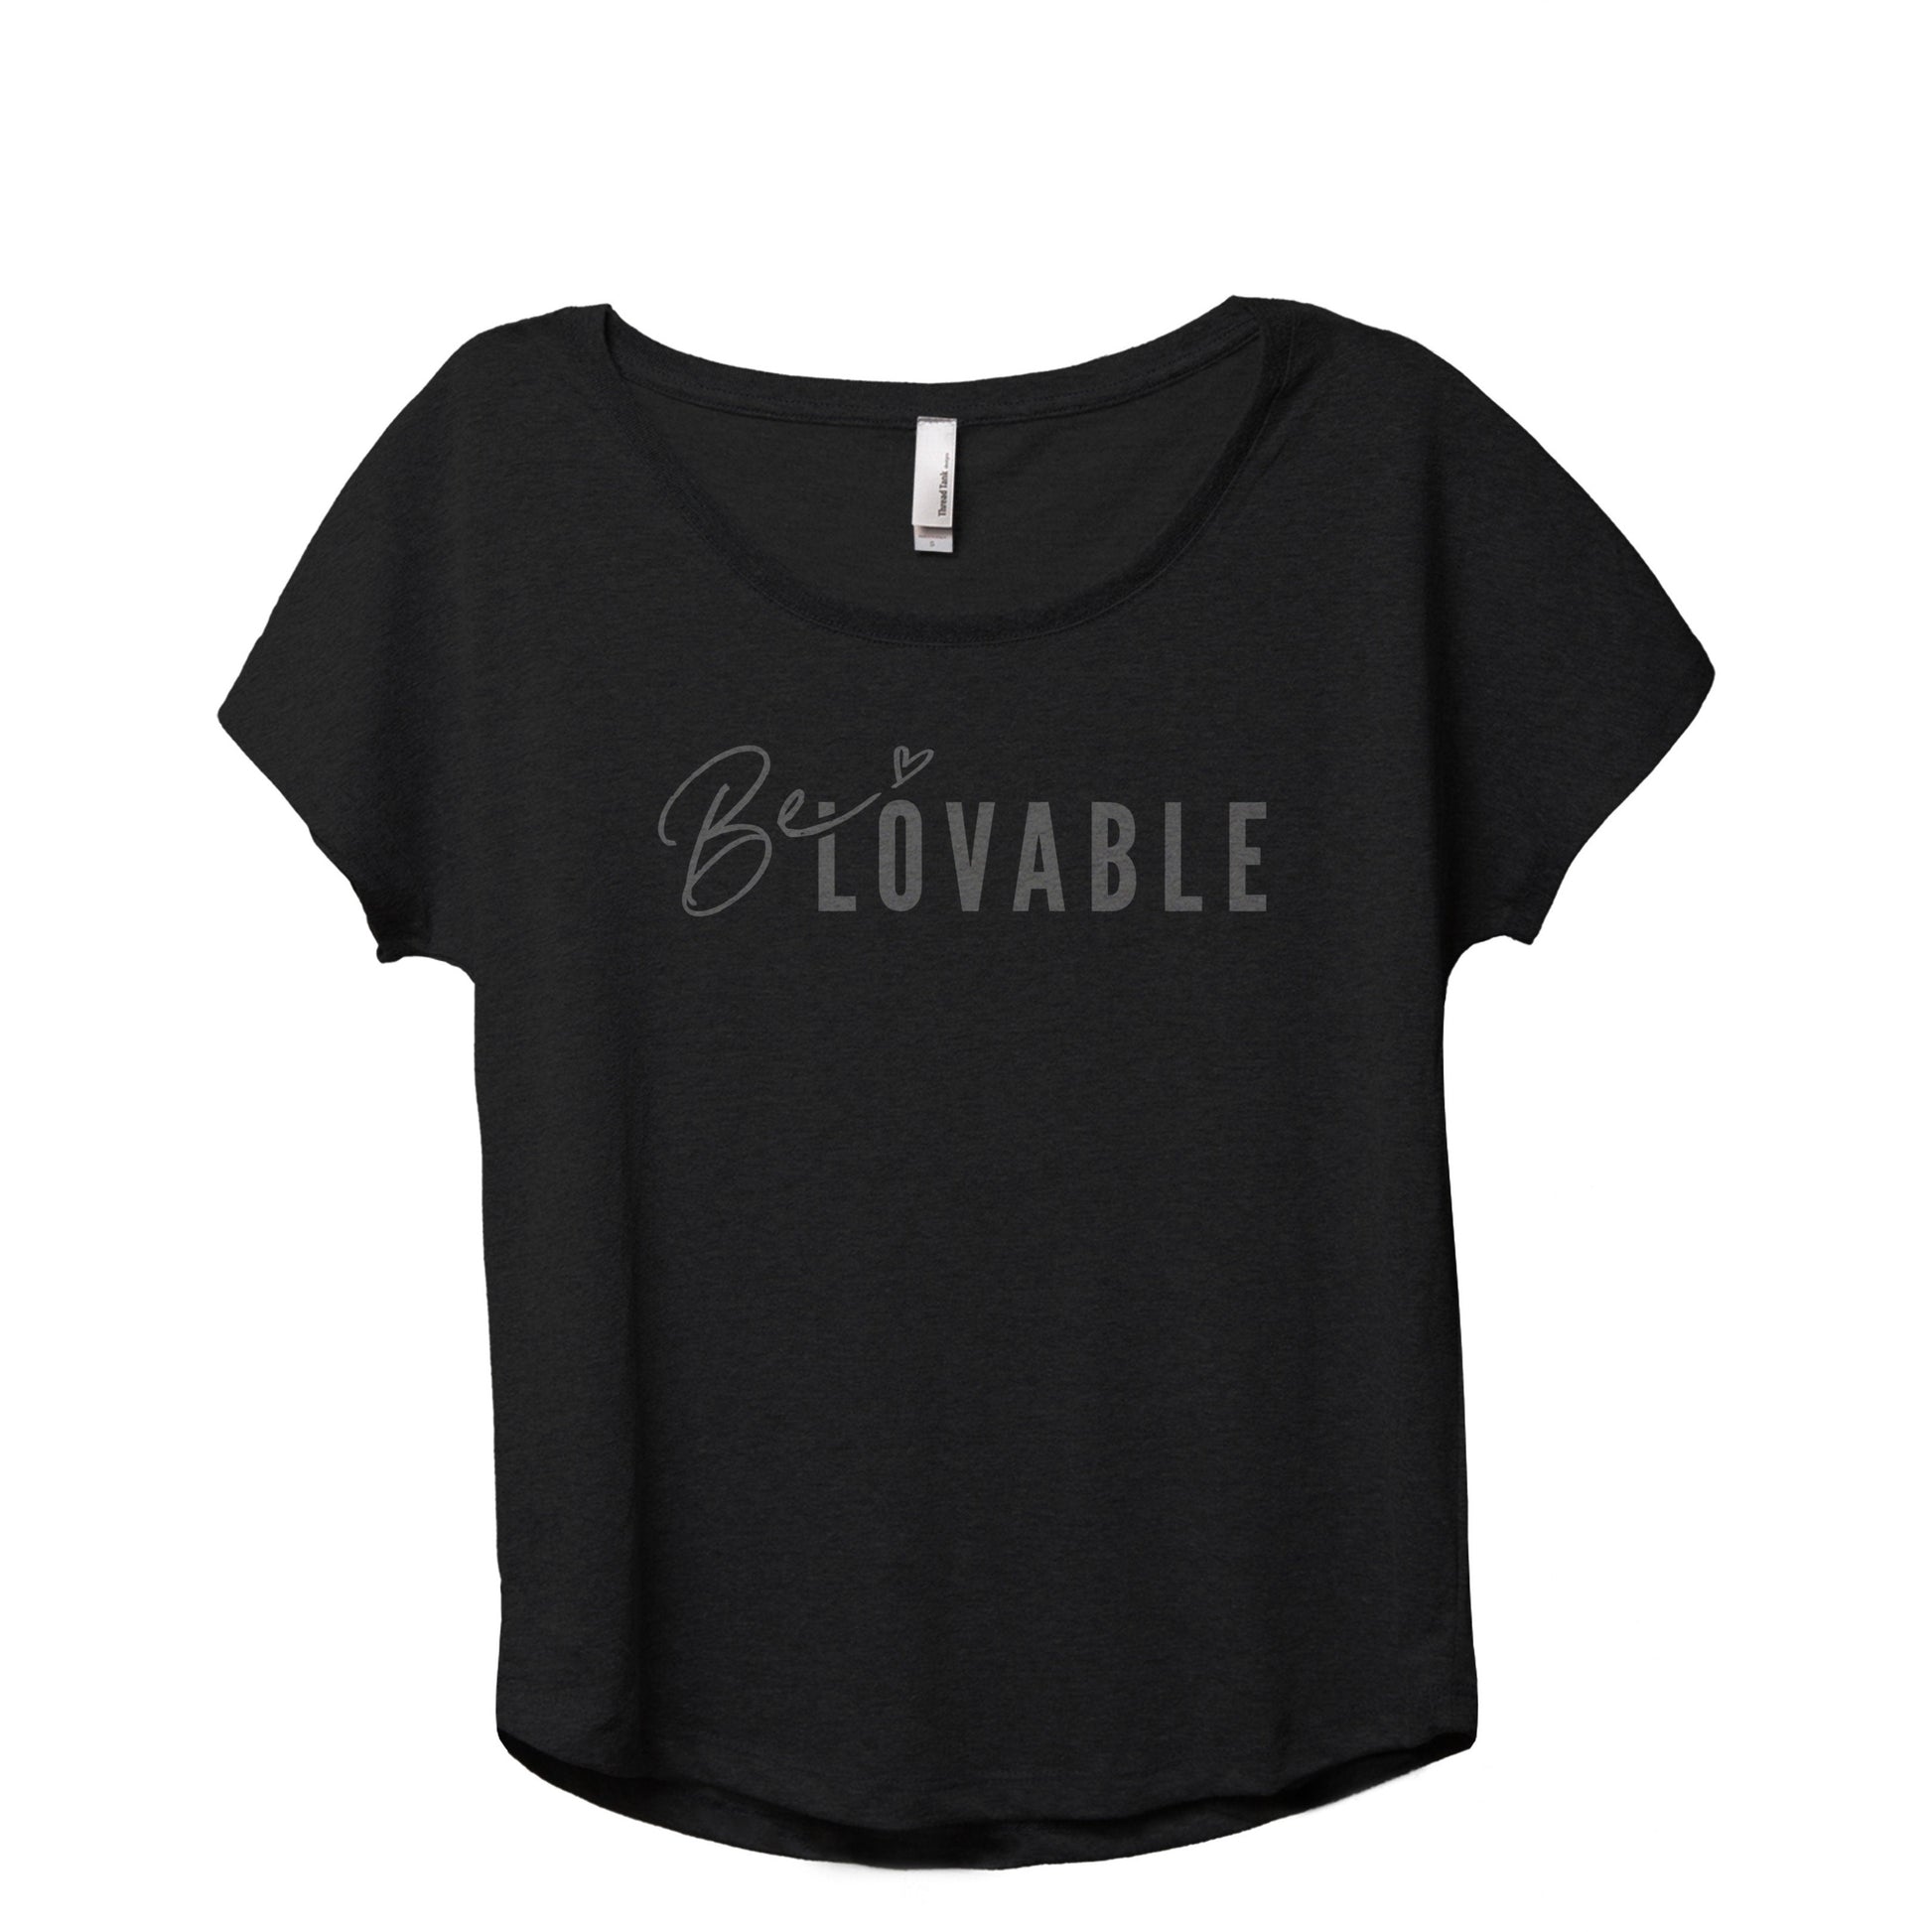 Lovable Women's Relaxed Slouchy Dolman T-Shirt Tee Heather Black